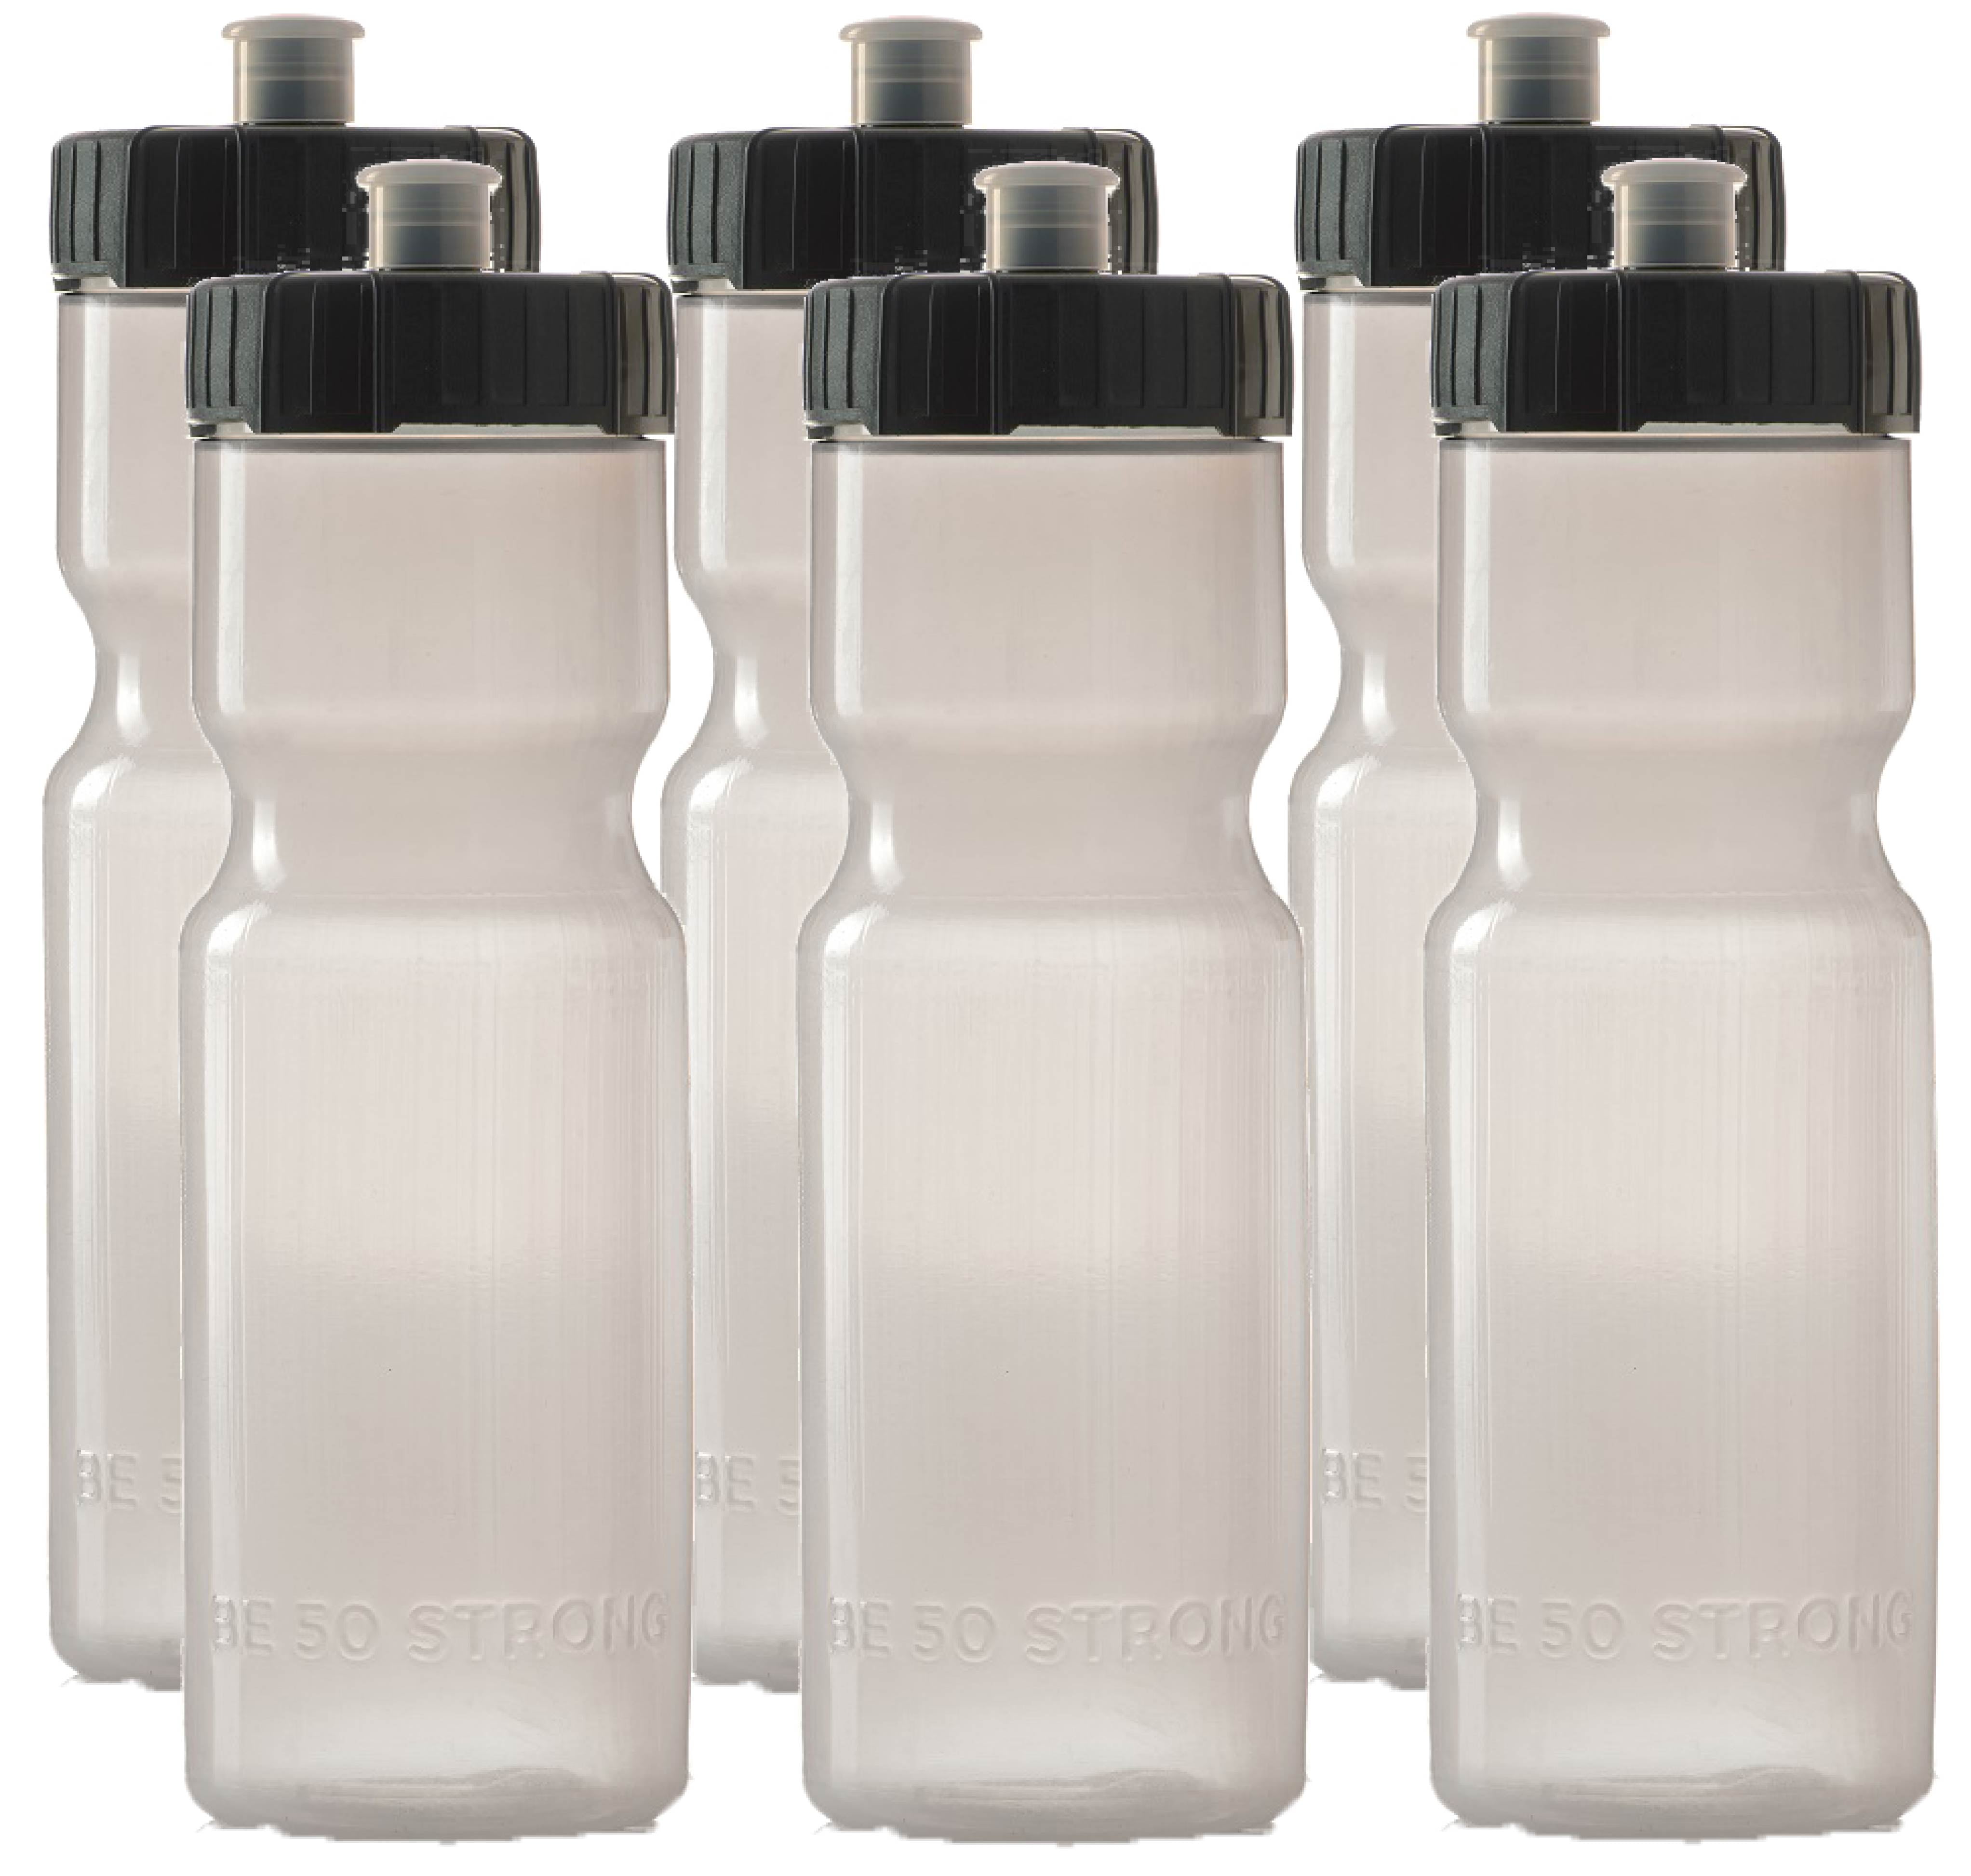 50 Strong Sports Squeeze Water Bottle Team Pack - Includes 6 Bottles - 22  oz. BPA Free